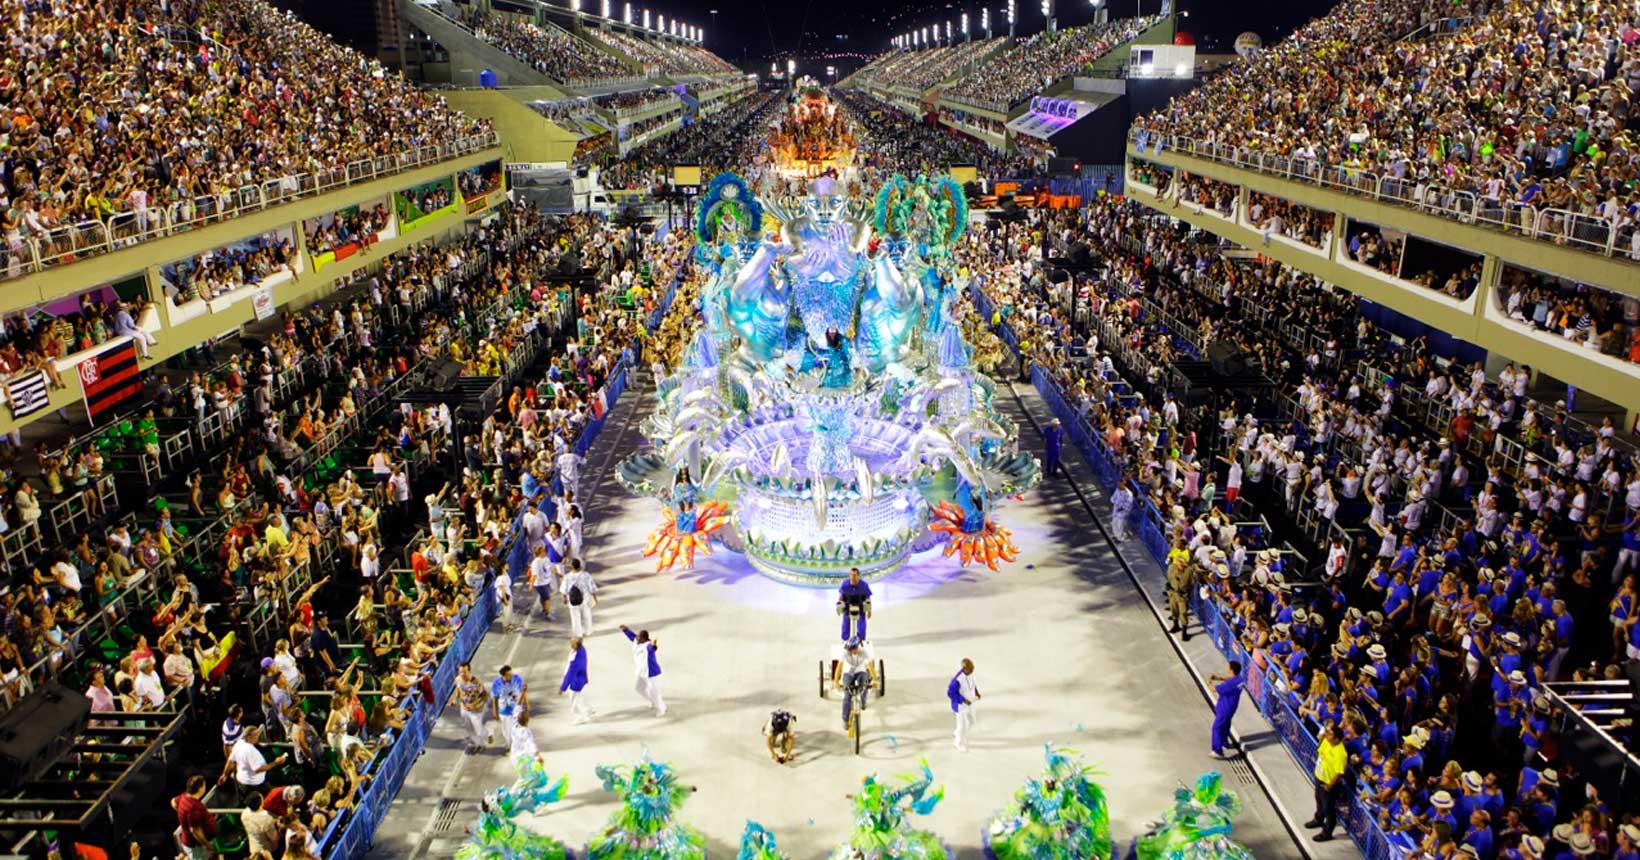 The cement and steel structures of Rio's sambadrome came to life again after two years of involuntary sleep due to the pandemic when the first school stepped onto Marquês de Sapucaí on April 20, in the Gold Series, the official start of the off-season Carnaval in Rio de Janeiro.